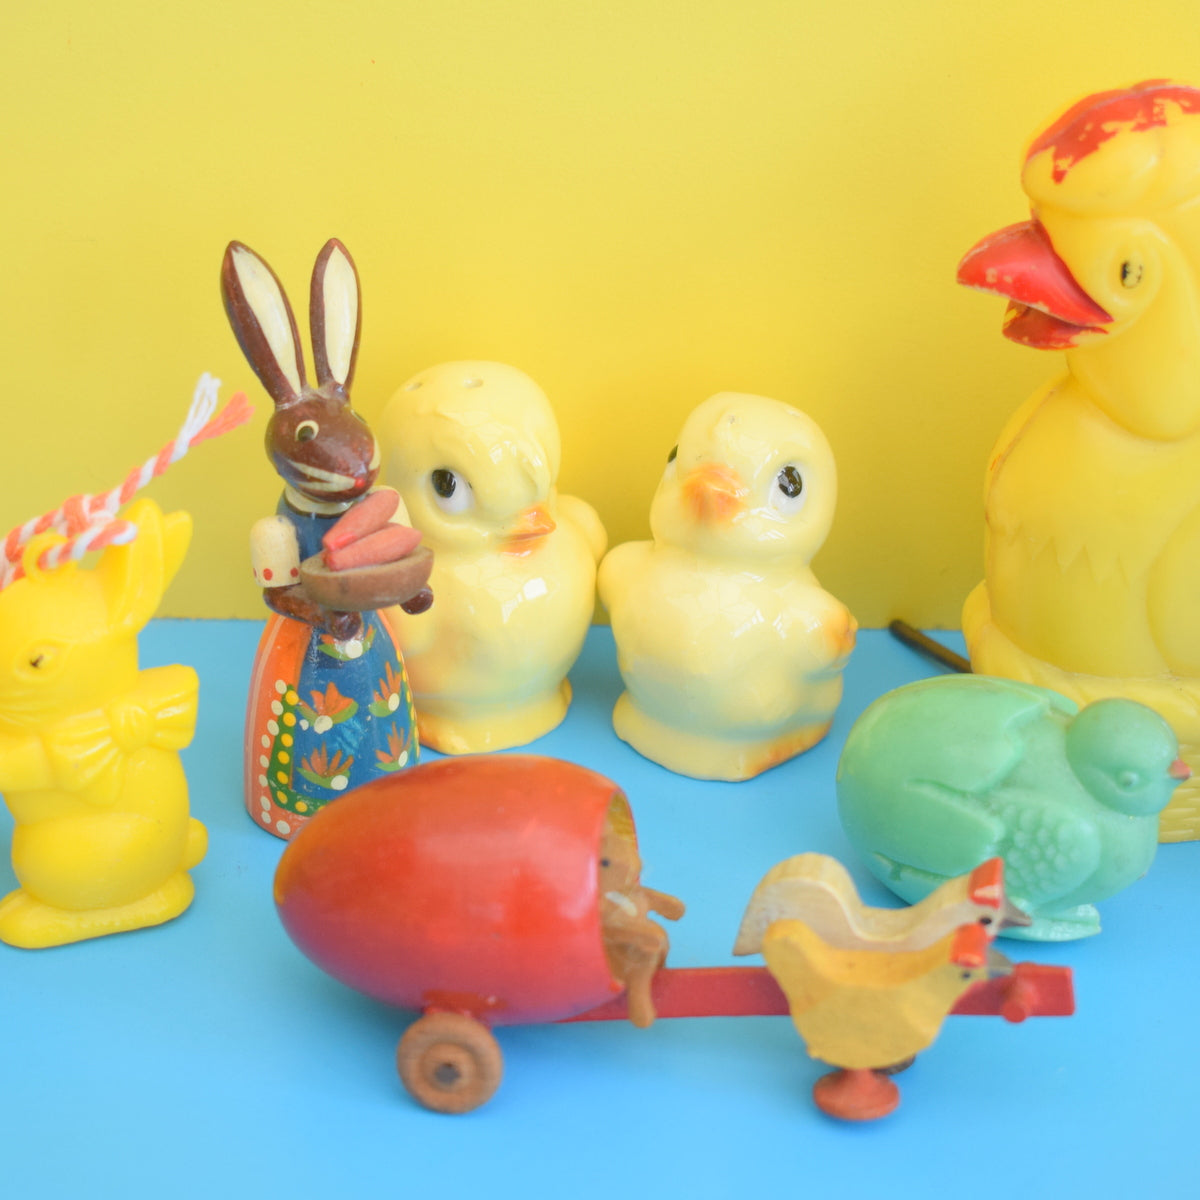 Vintage 1950s Kitsch Easter Bits - Bunnies And Chics